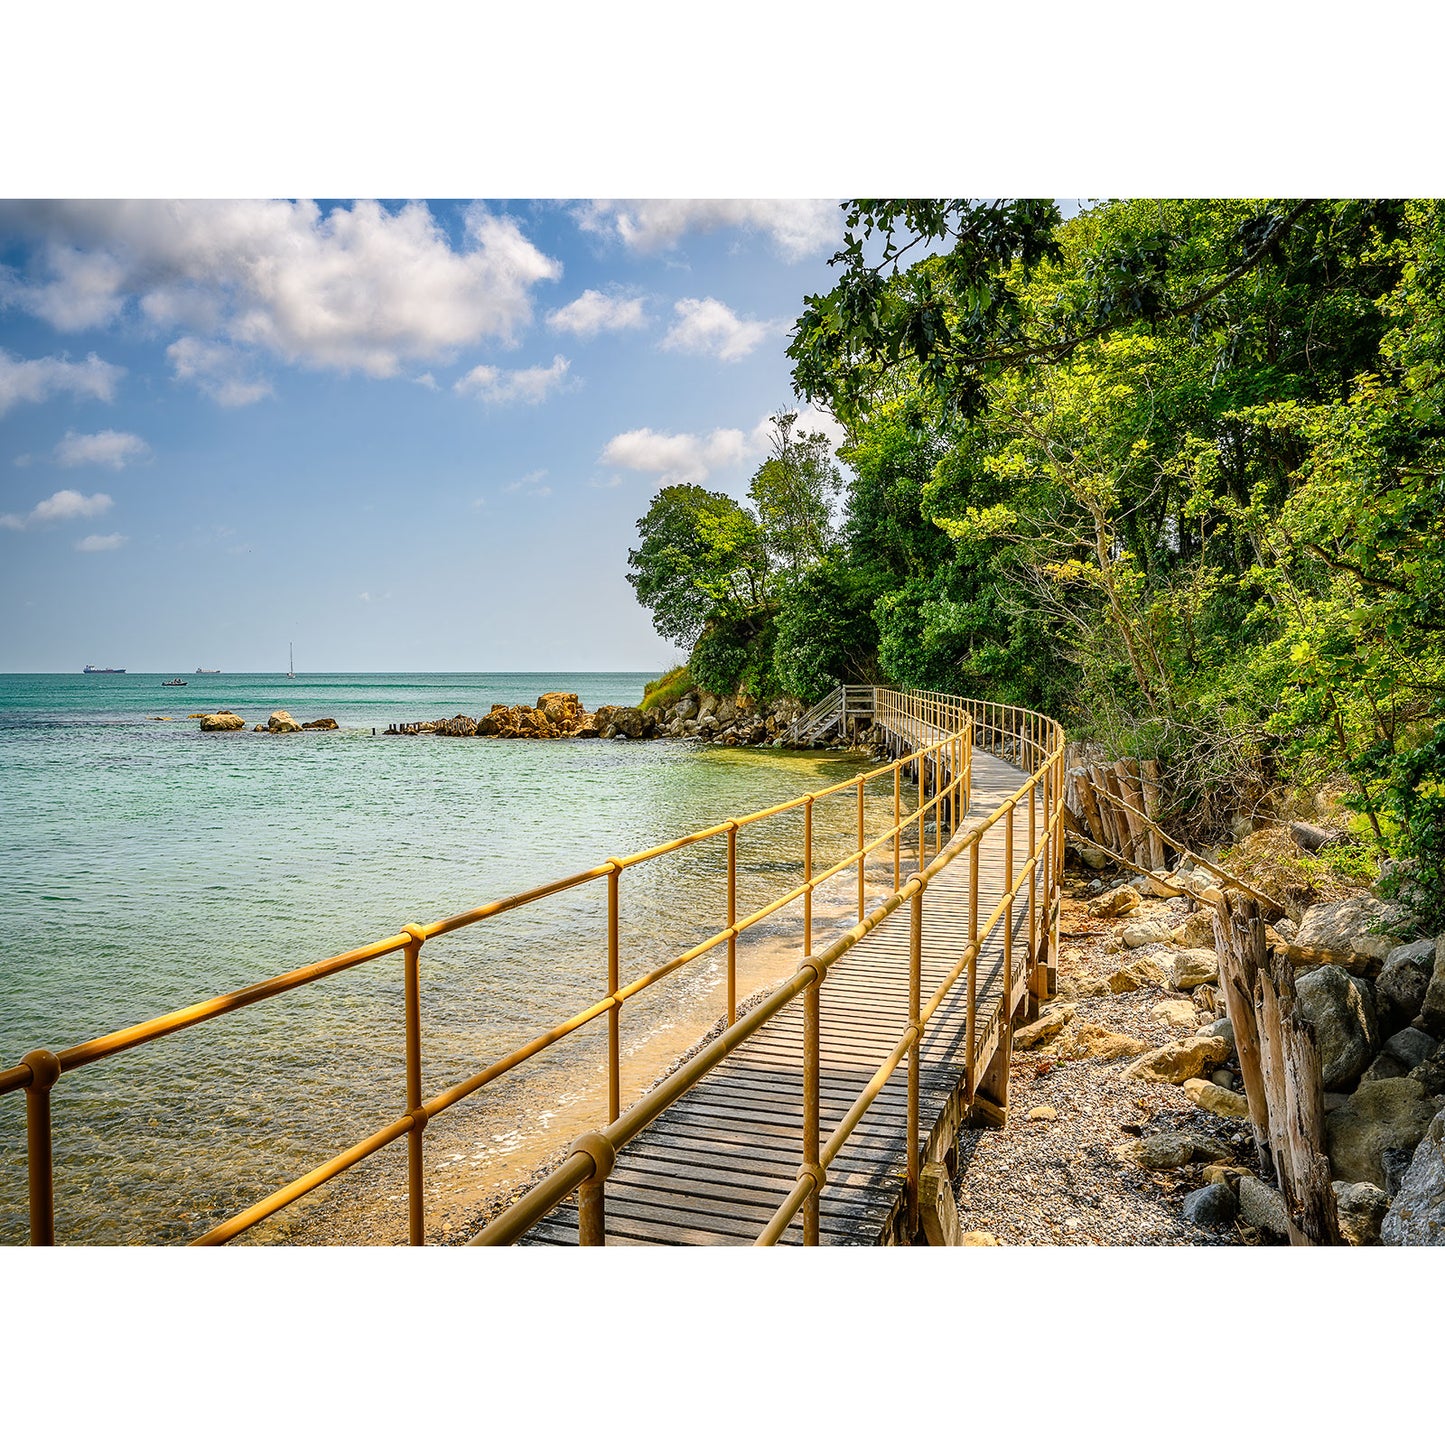 Seagrove Bay boardwalk along a rocky shoreline with lush greenery under a clear sky on the Isle of Wight by Available Light Photography.